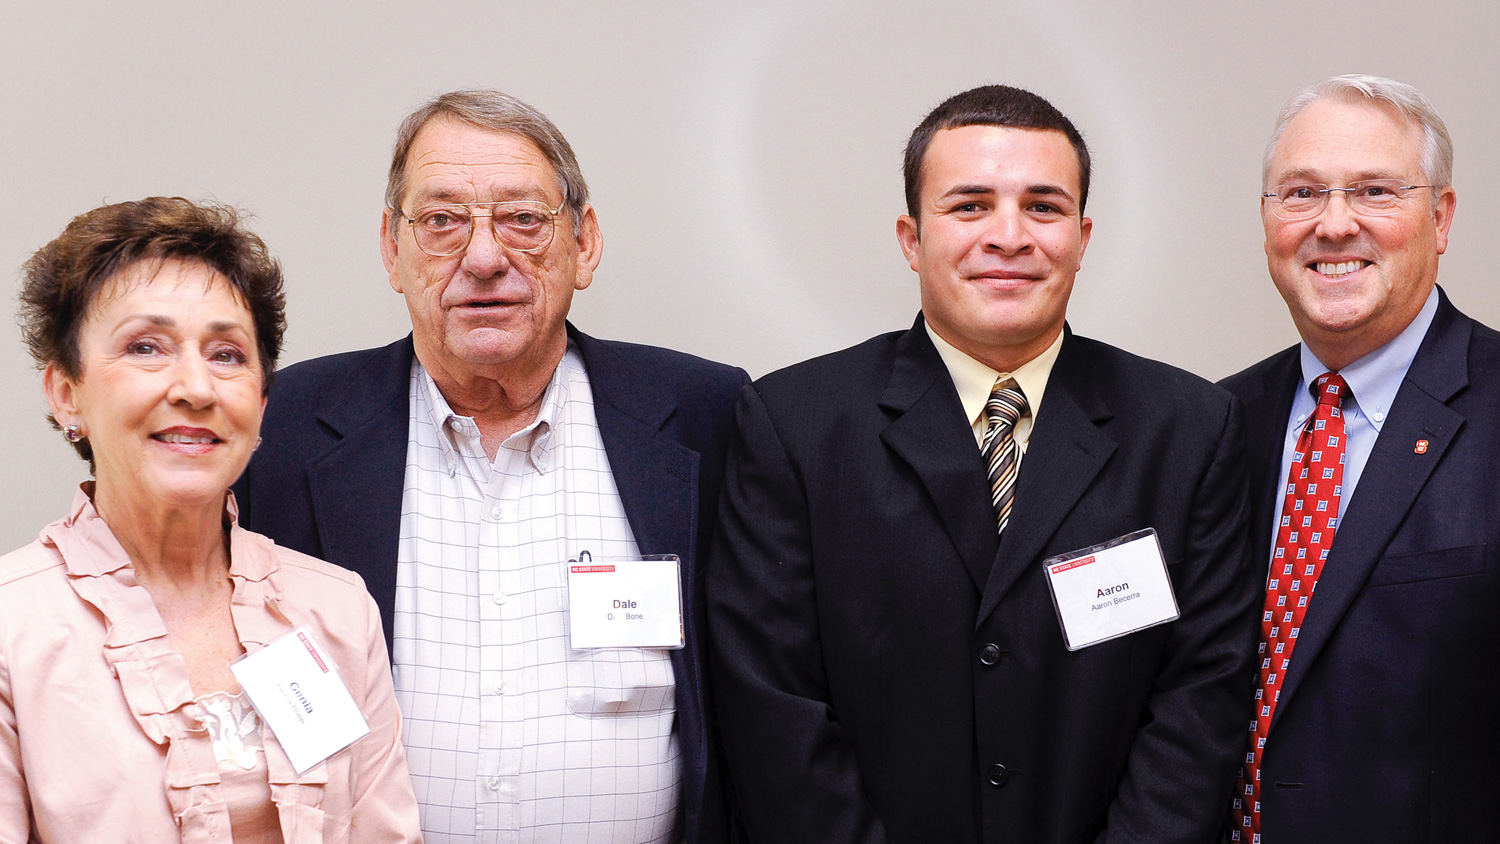 Genia and Dale Bone (left) with Bone Scholar Aaron Becerra and NC State Chancellor Randy Woodson (far right).